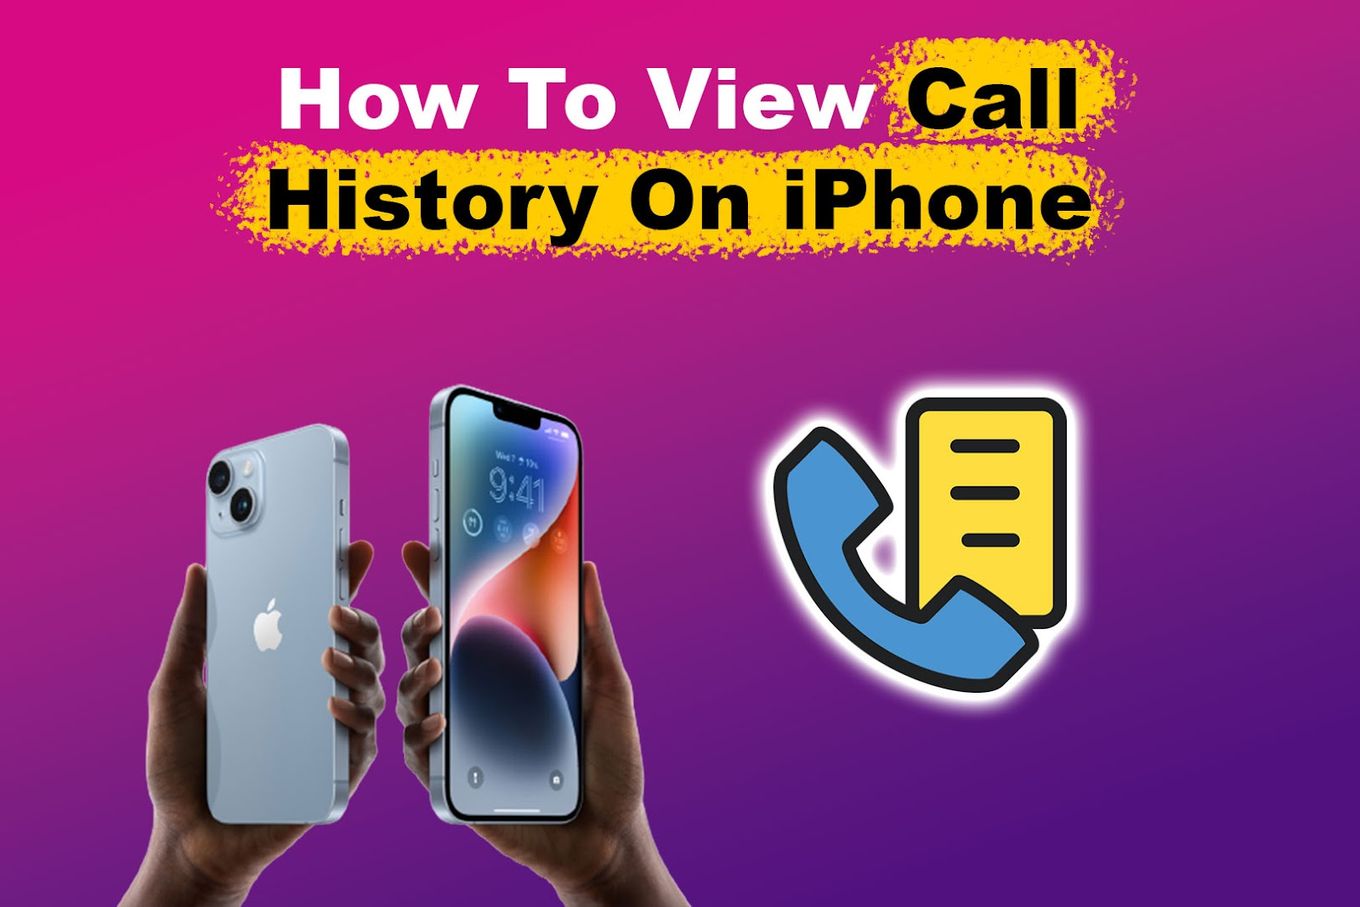 How To View Old Call History On iPhone